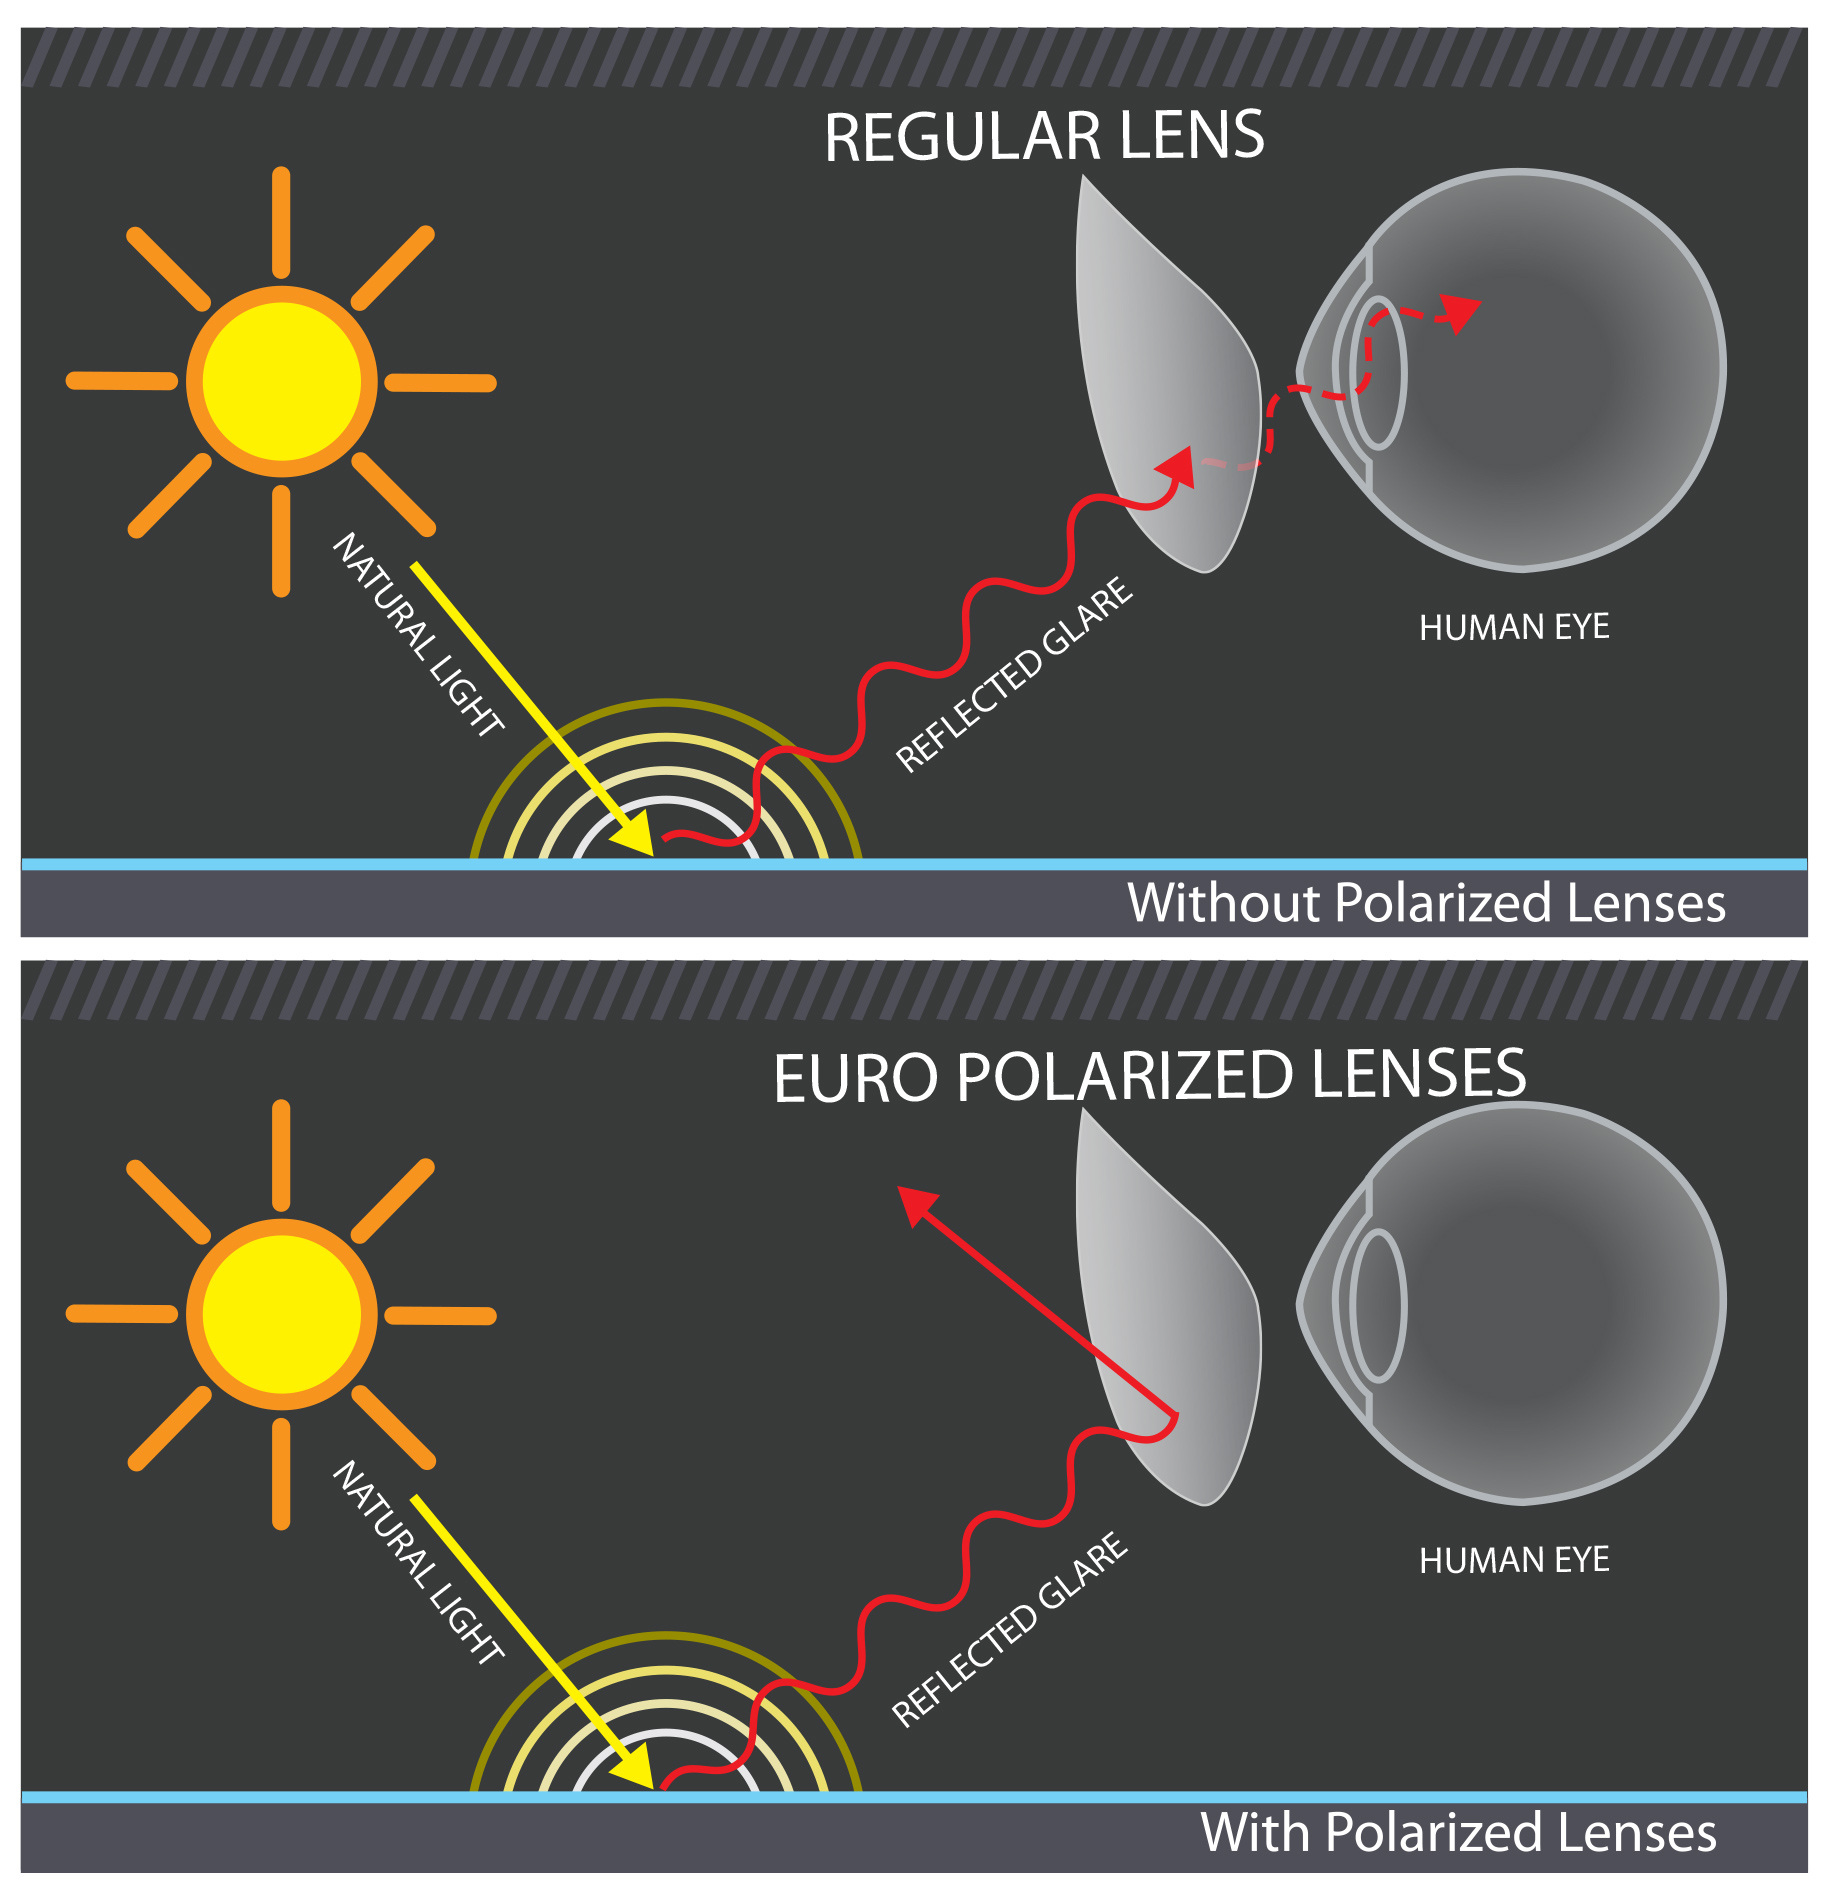 Polarized Vs Non-Polarized Sunglasses Differences And Uses | vlr.eng.br